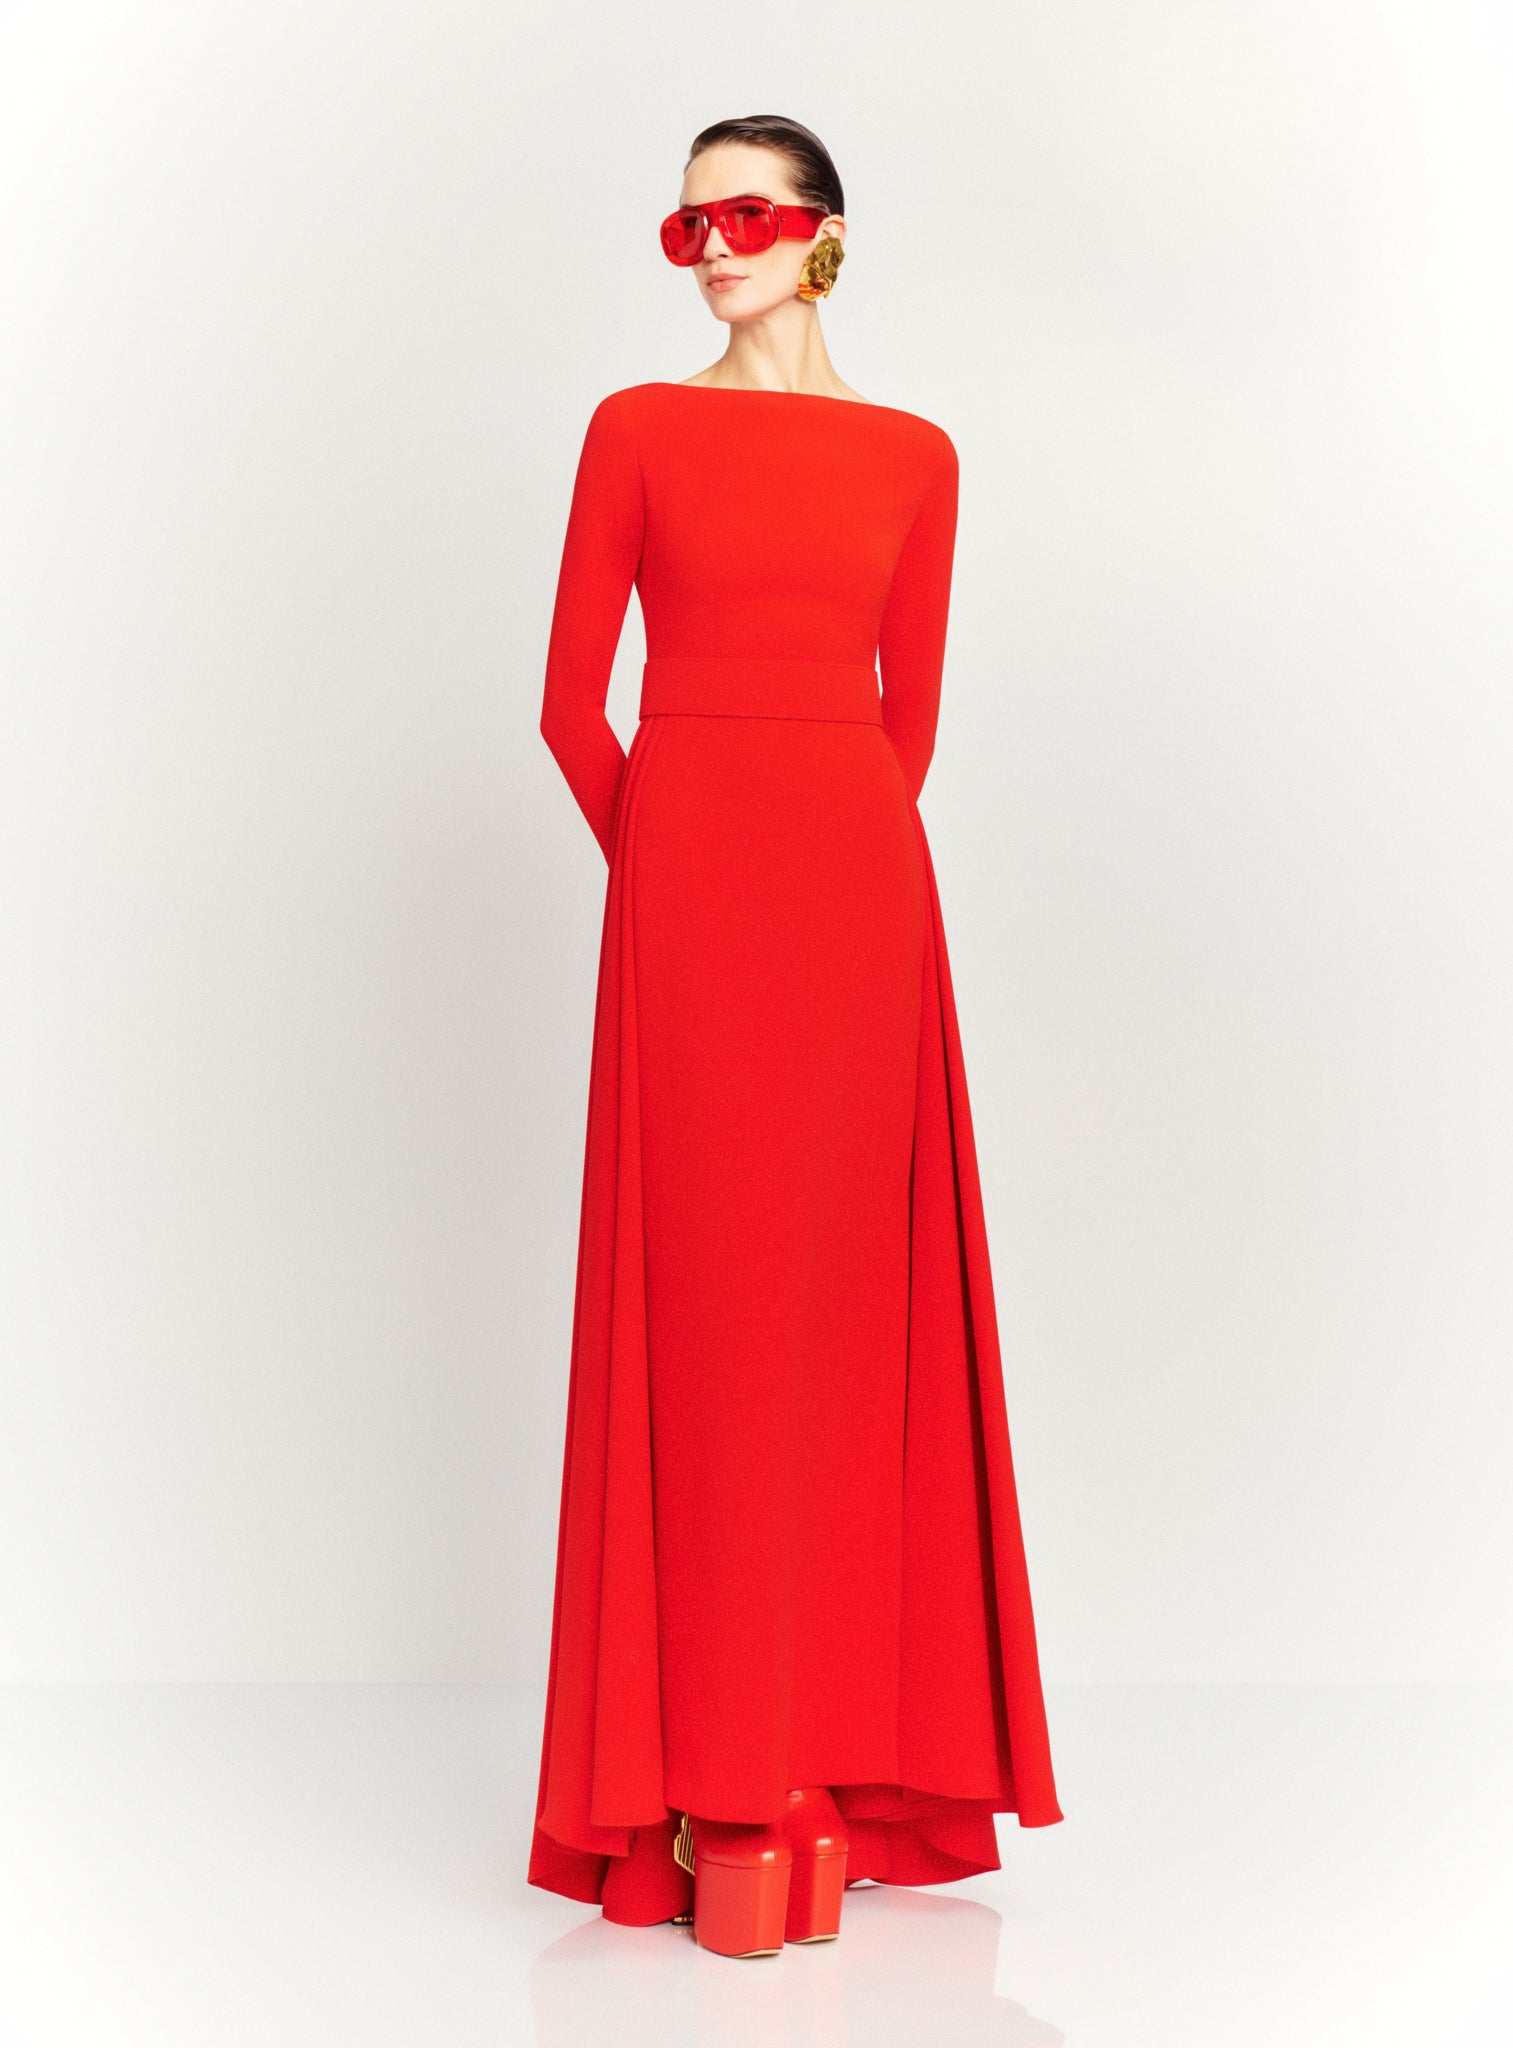 The Shayla Maxi Dress in Red